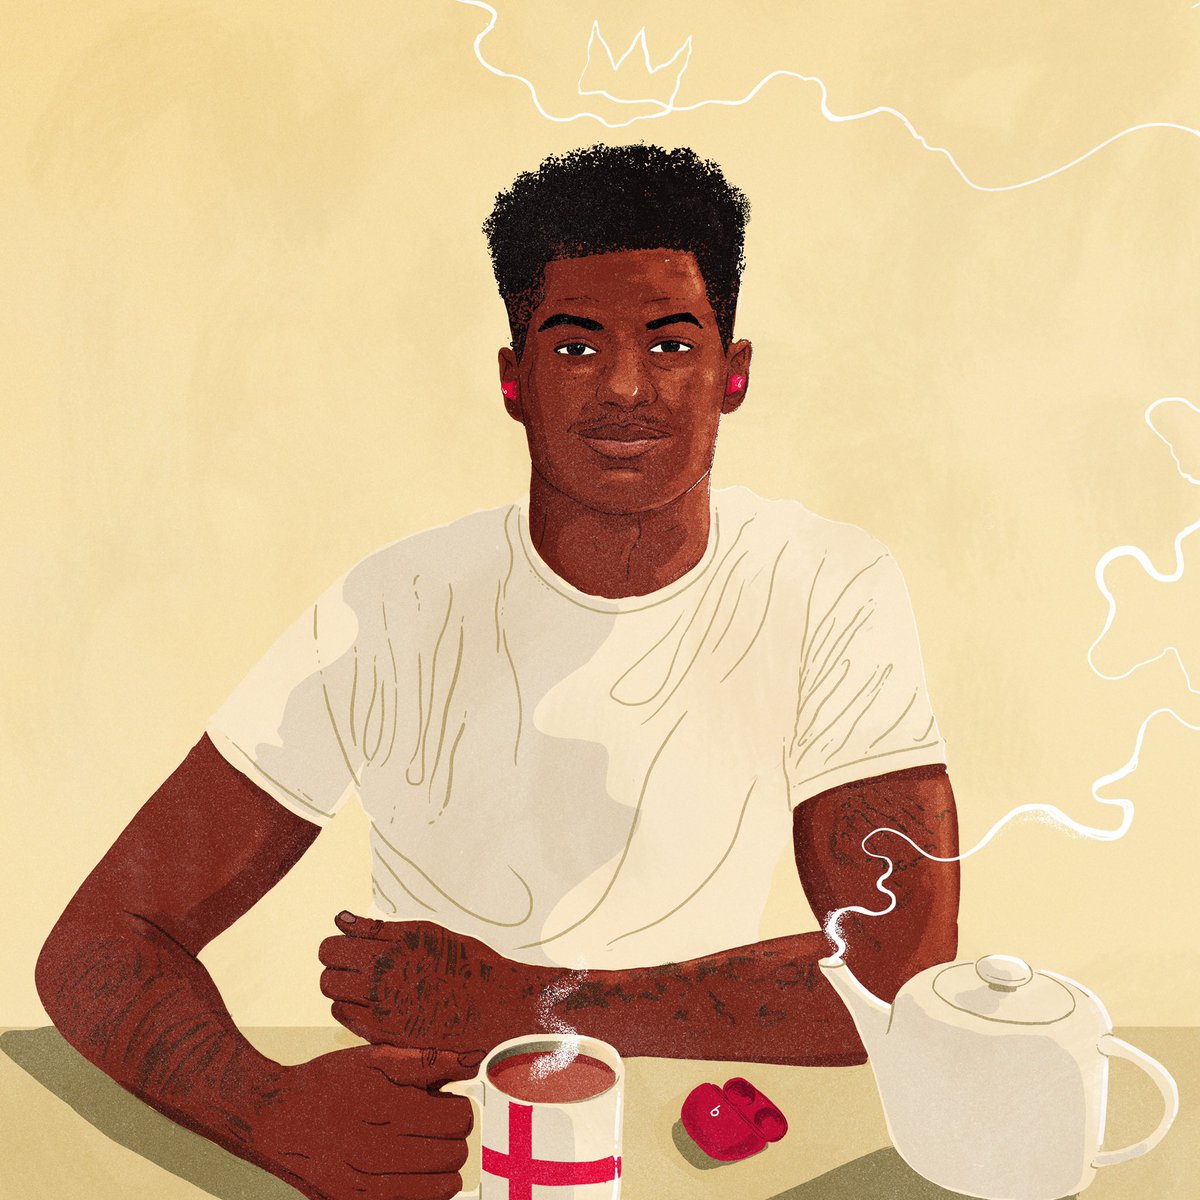 .@MarcusRashford continues to be an inspiration through the mission to #EndChildFoodPoverty in the UK. Visit his page to learn more about the #WriteNow initiative. Artwork by @Reubendangerman